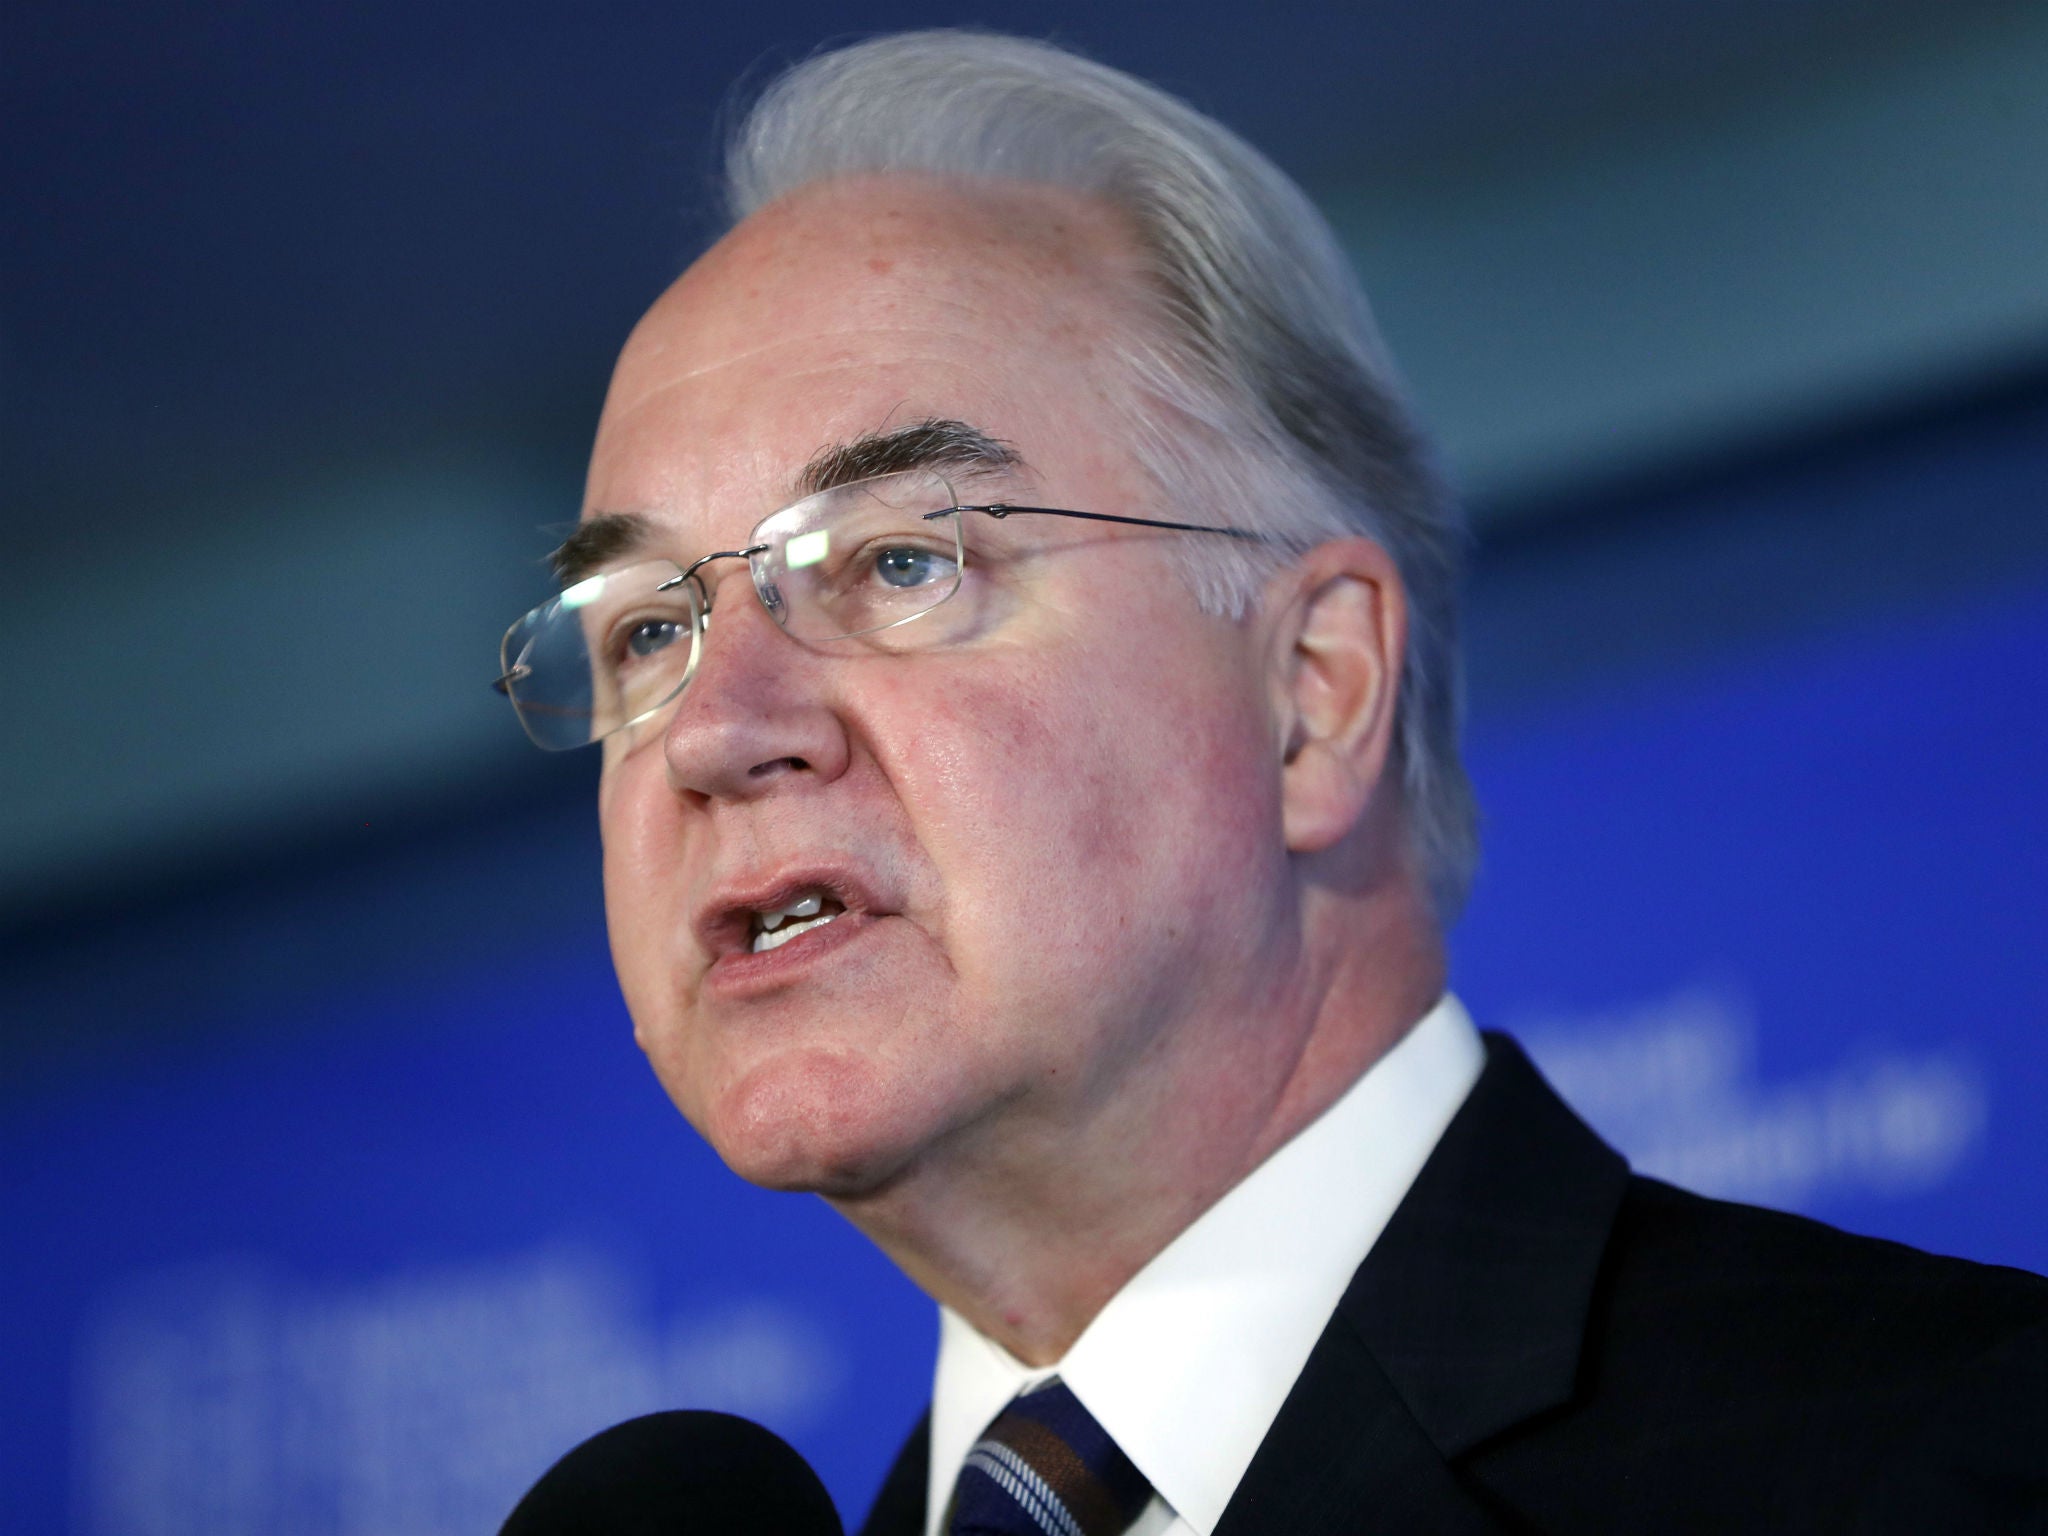 Tom Price resigned after taking a number of private flights using taxpayer funds